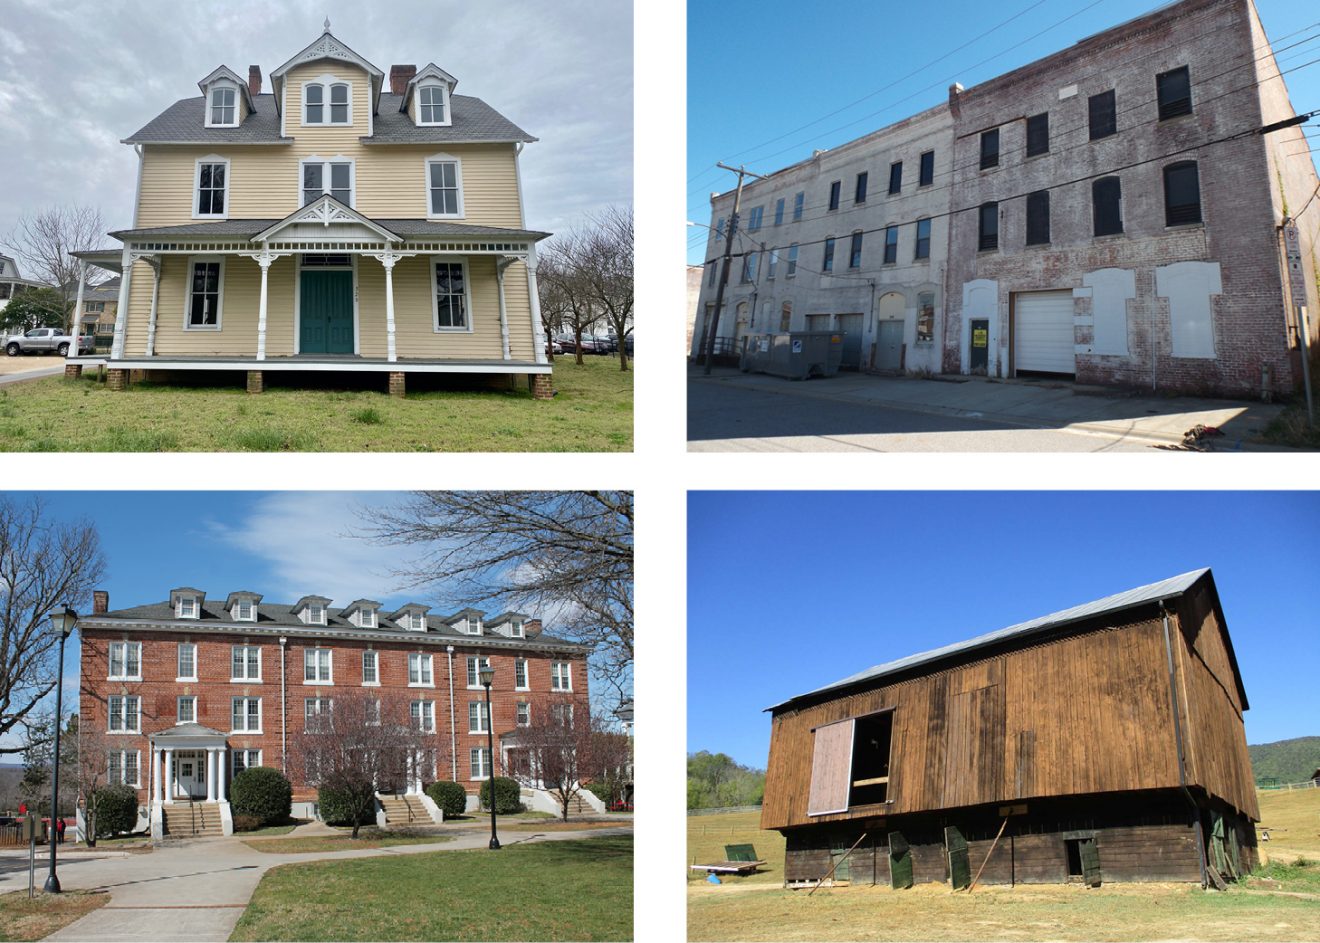 Images of four buildings that will be considered for listing on the registers